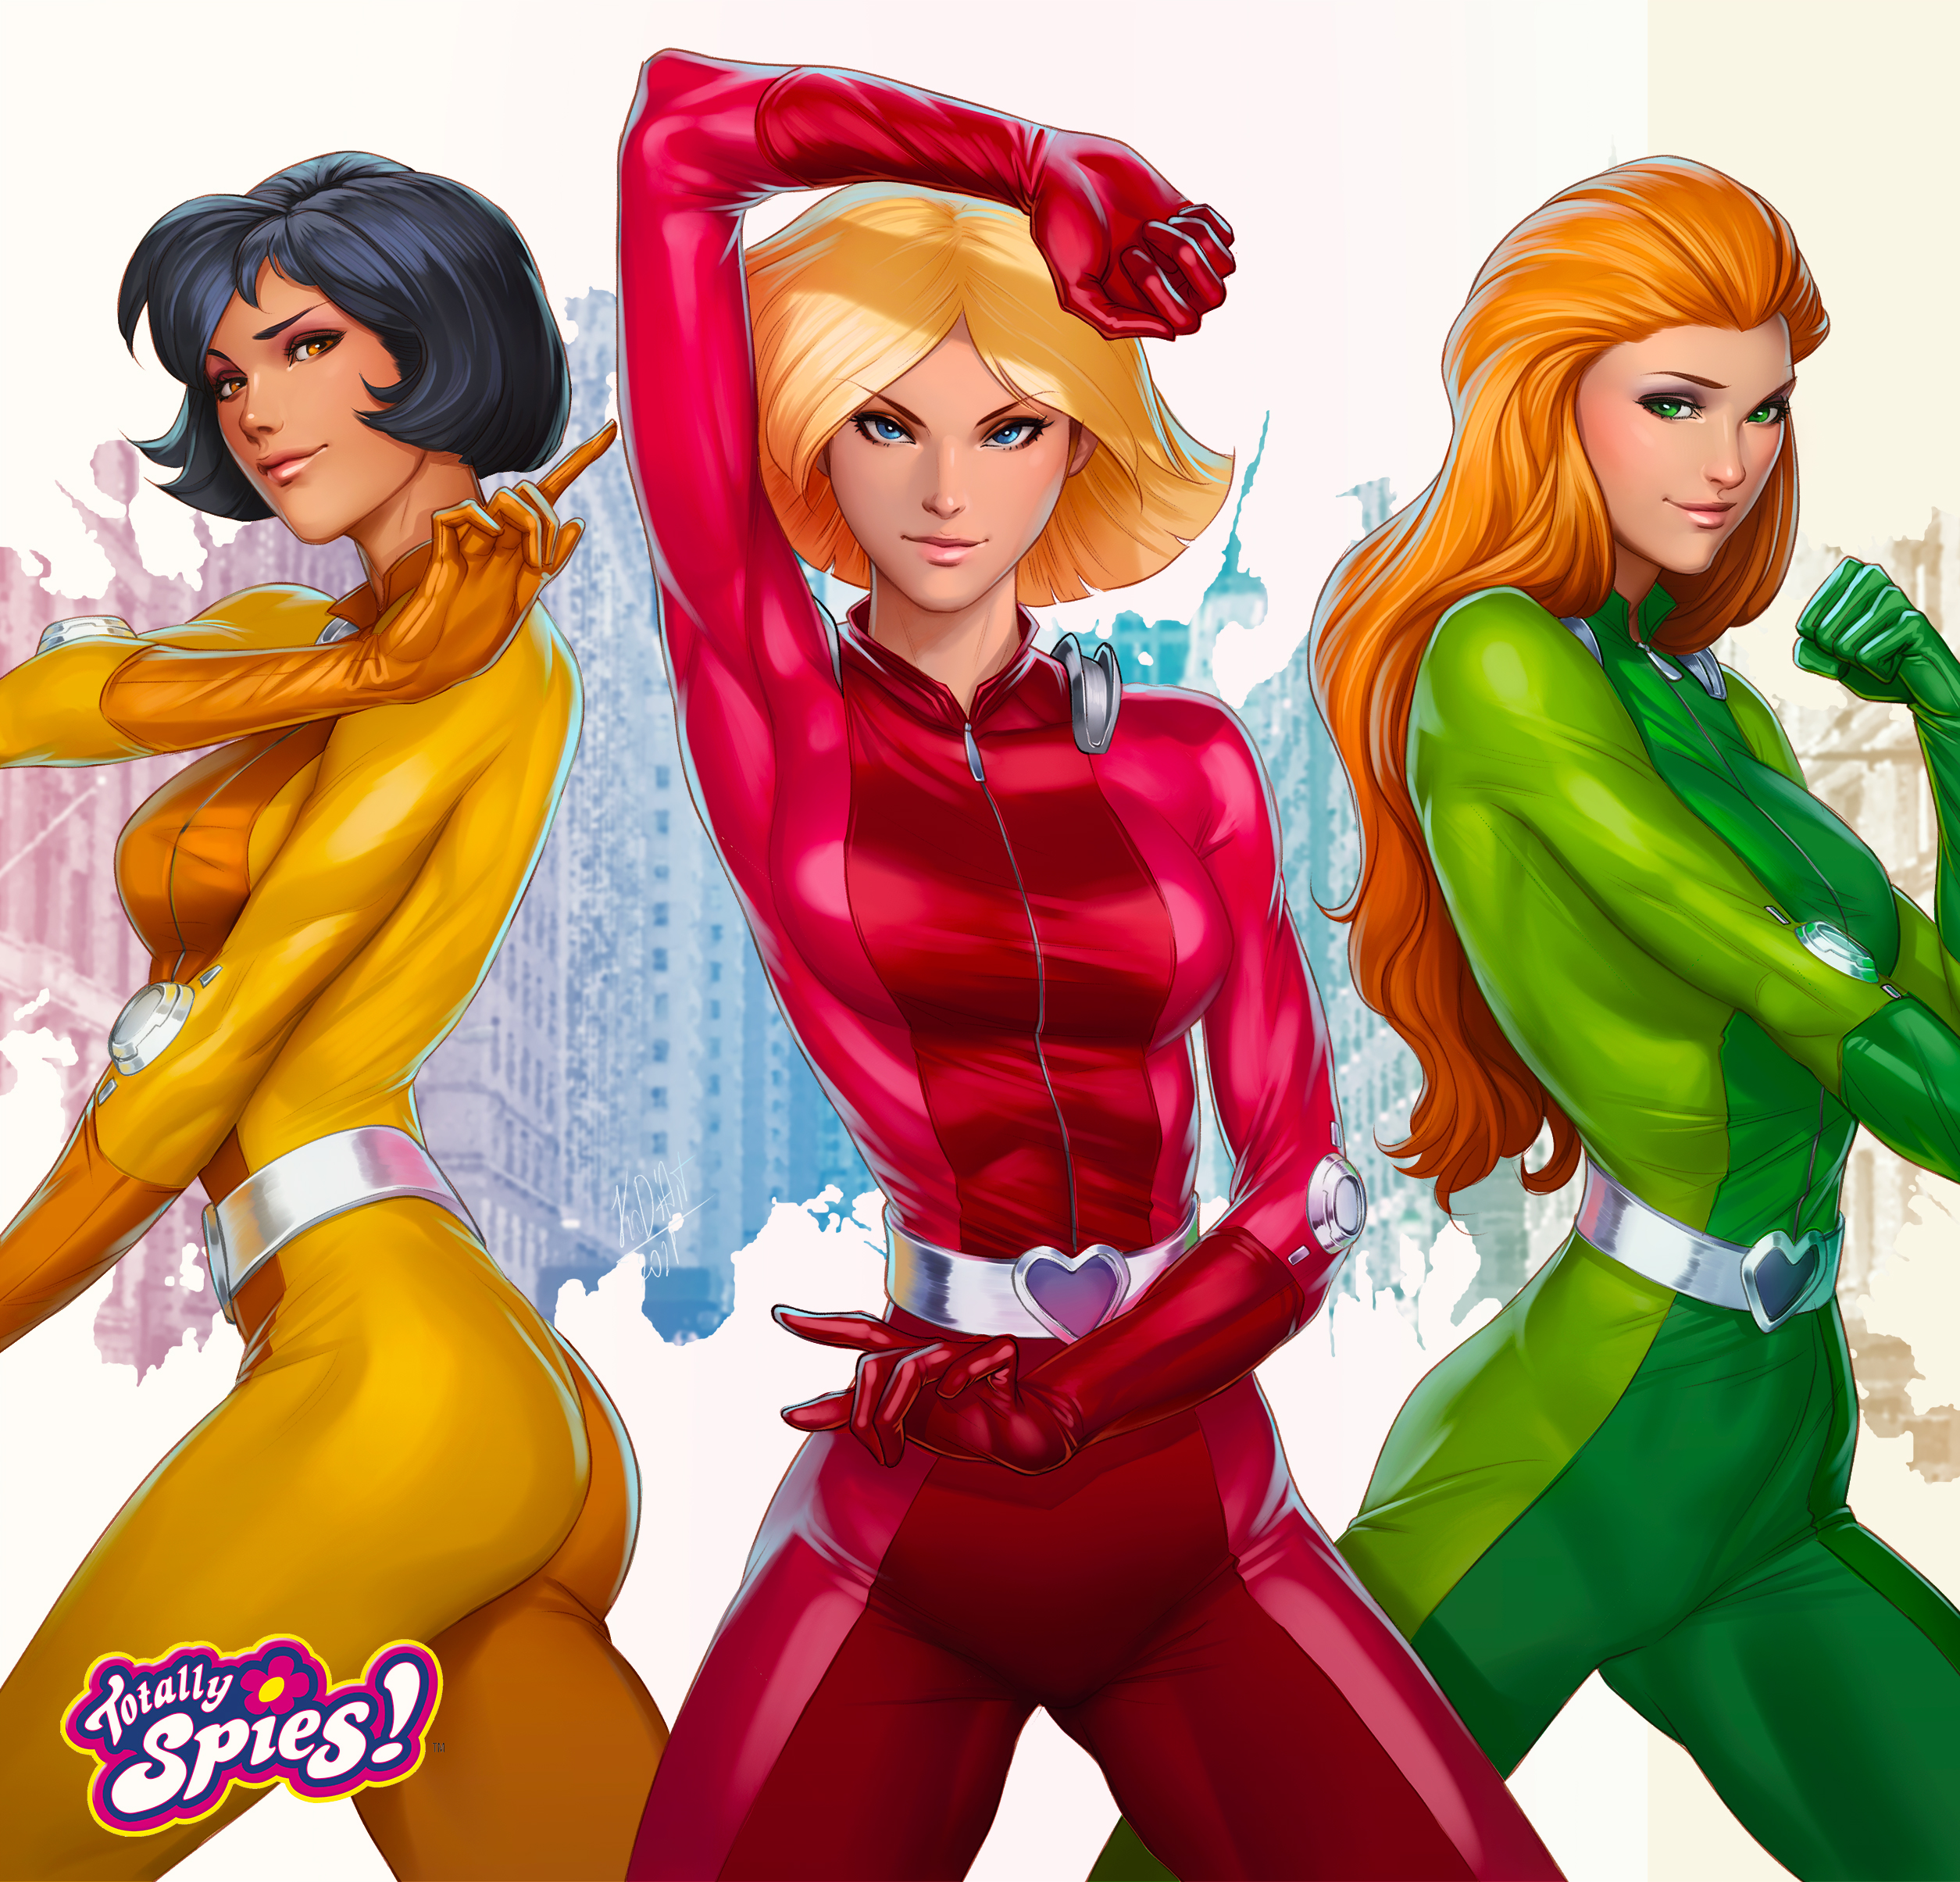 Totally Spies! Art